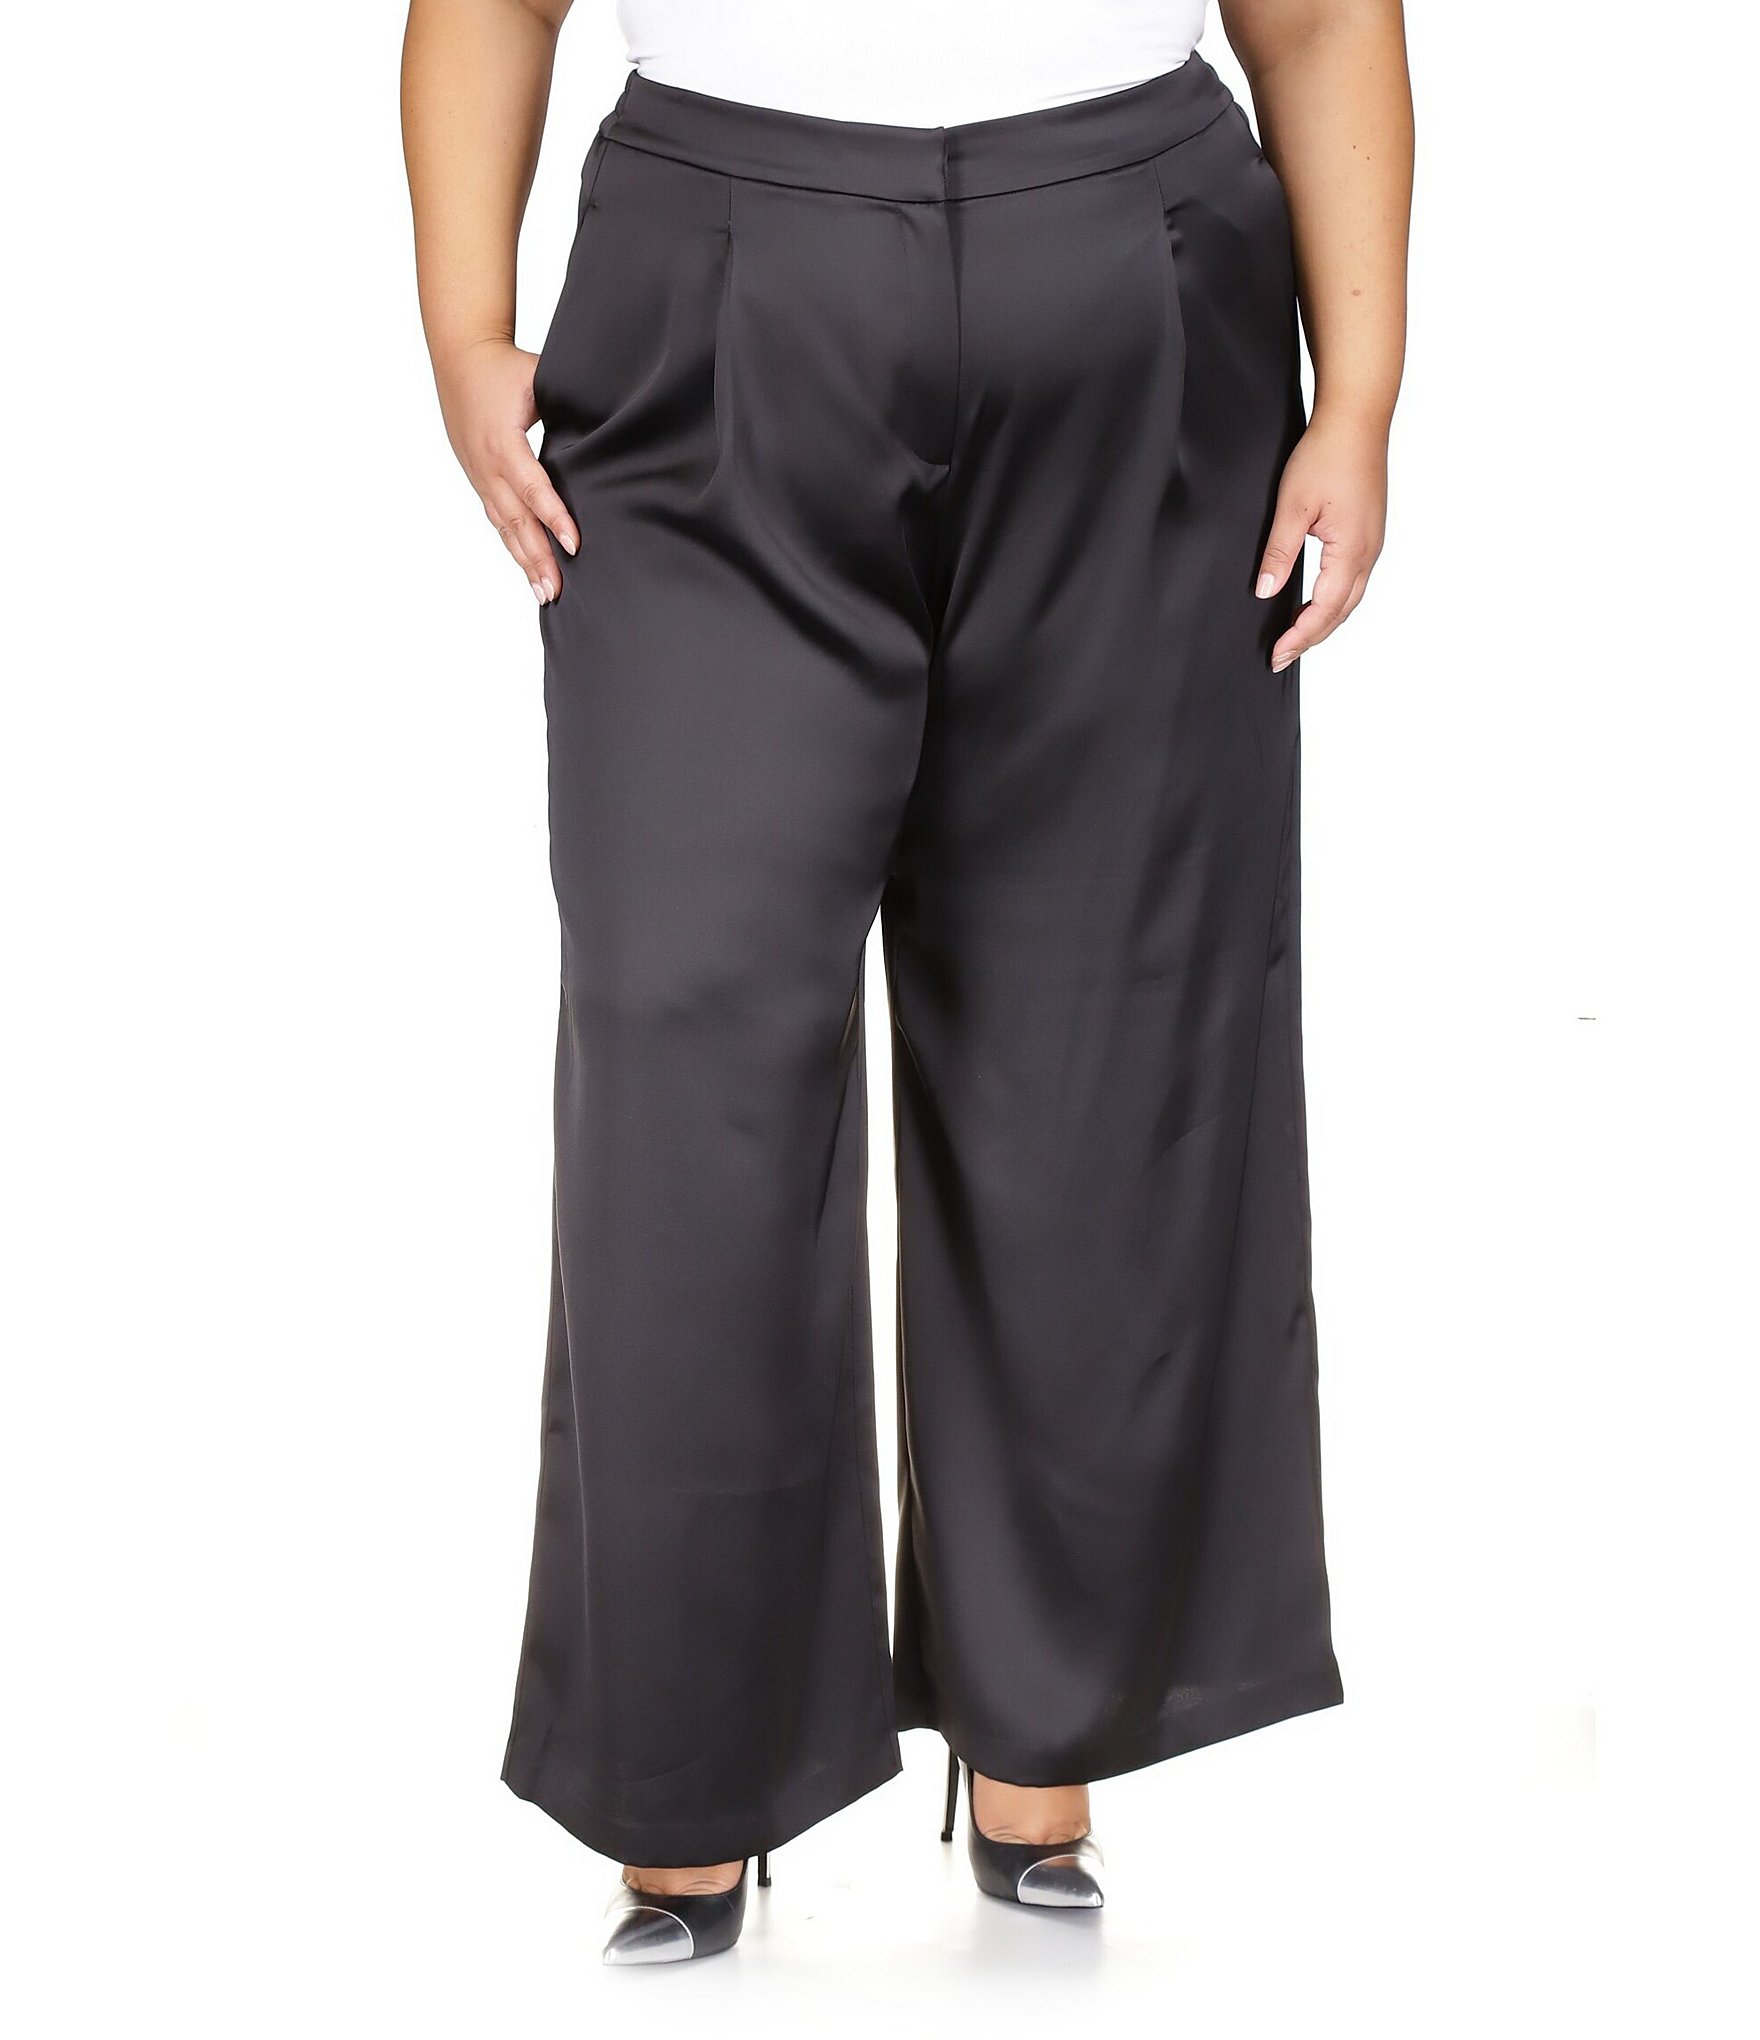 Multiples Plus Size Solid Stretch Velvet Knit Wide-Leg Pull-On Pants